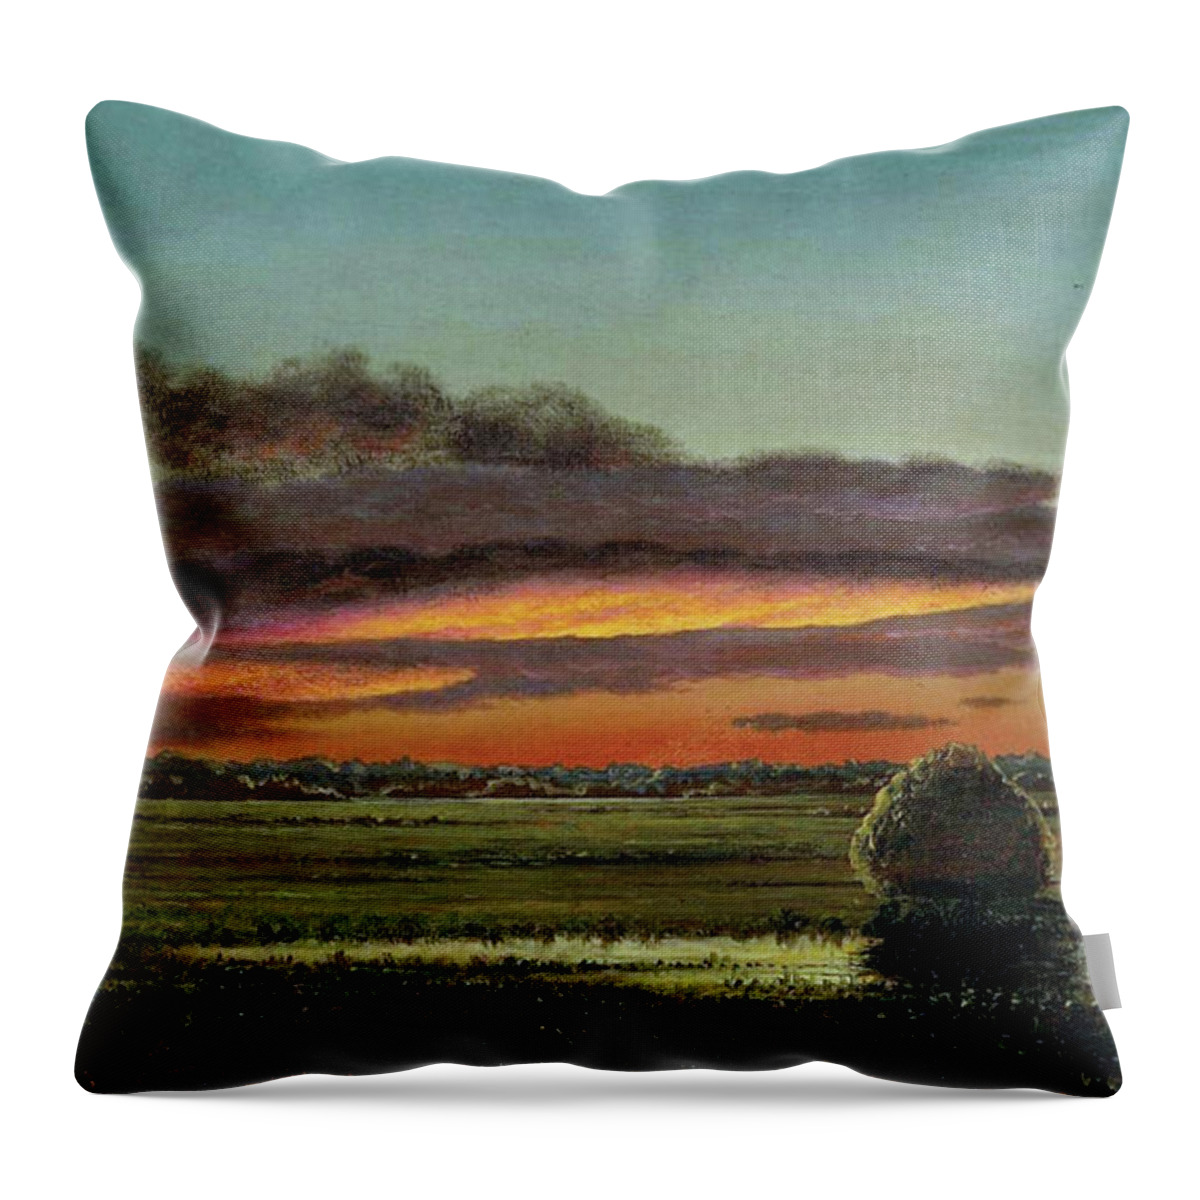 Summer Throw Pillow featuring the digital art Sunset Over the Marshes by Long Shot